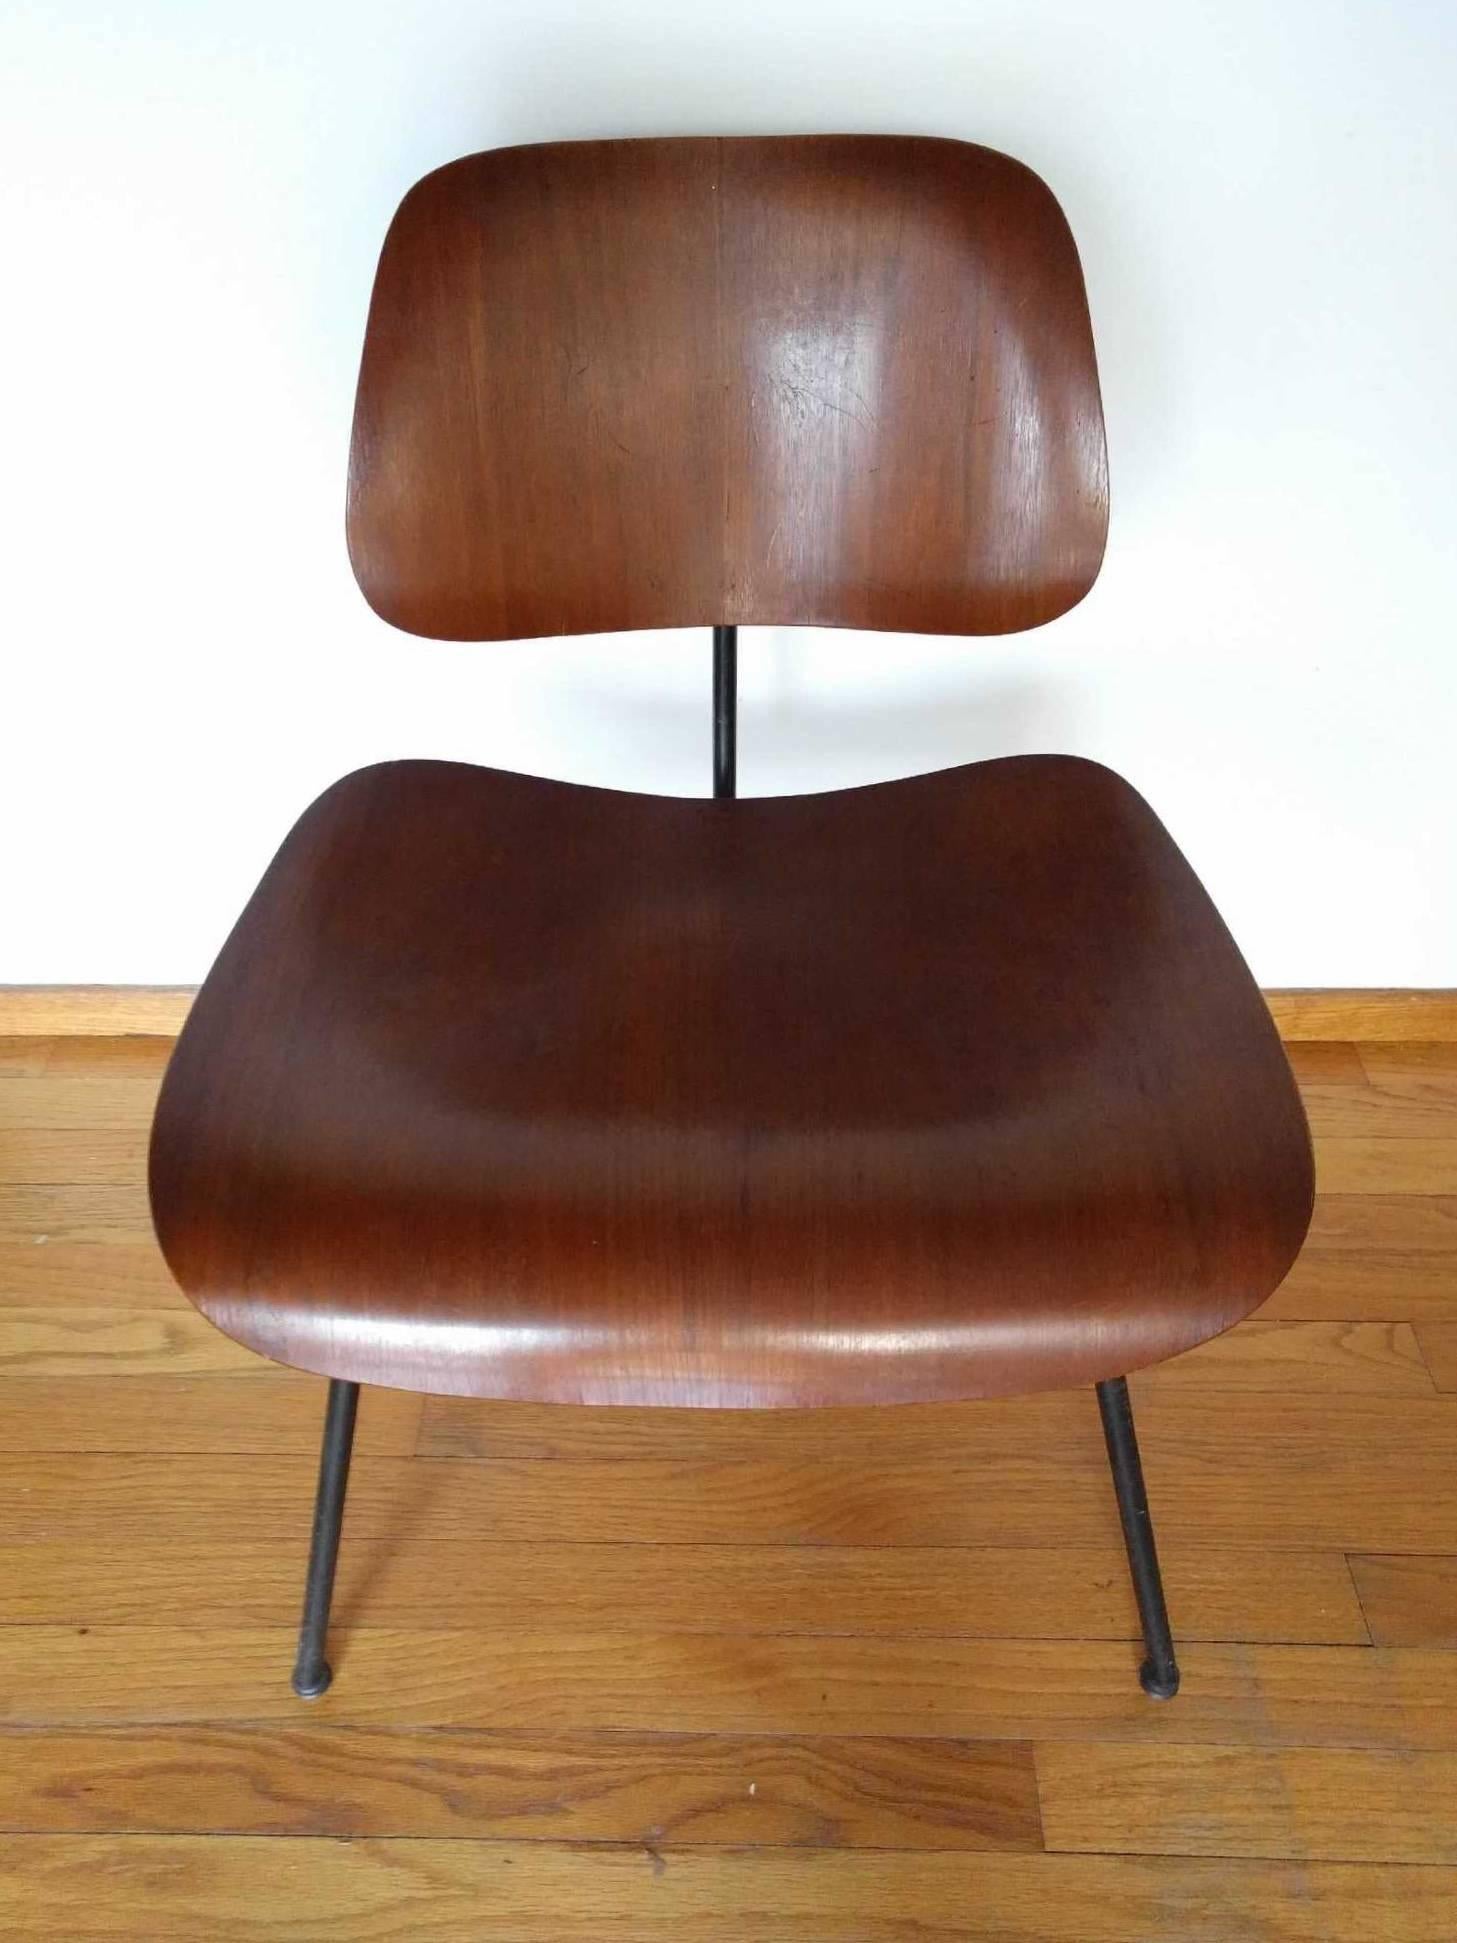 All original early Herman Miller Eames DCM chair in walnut. Marked 1951. Gorgeous patina and black iron base. Original mounts and glides.